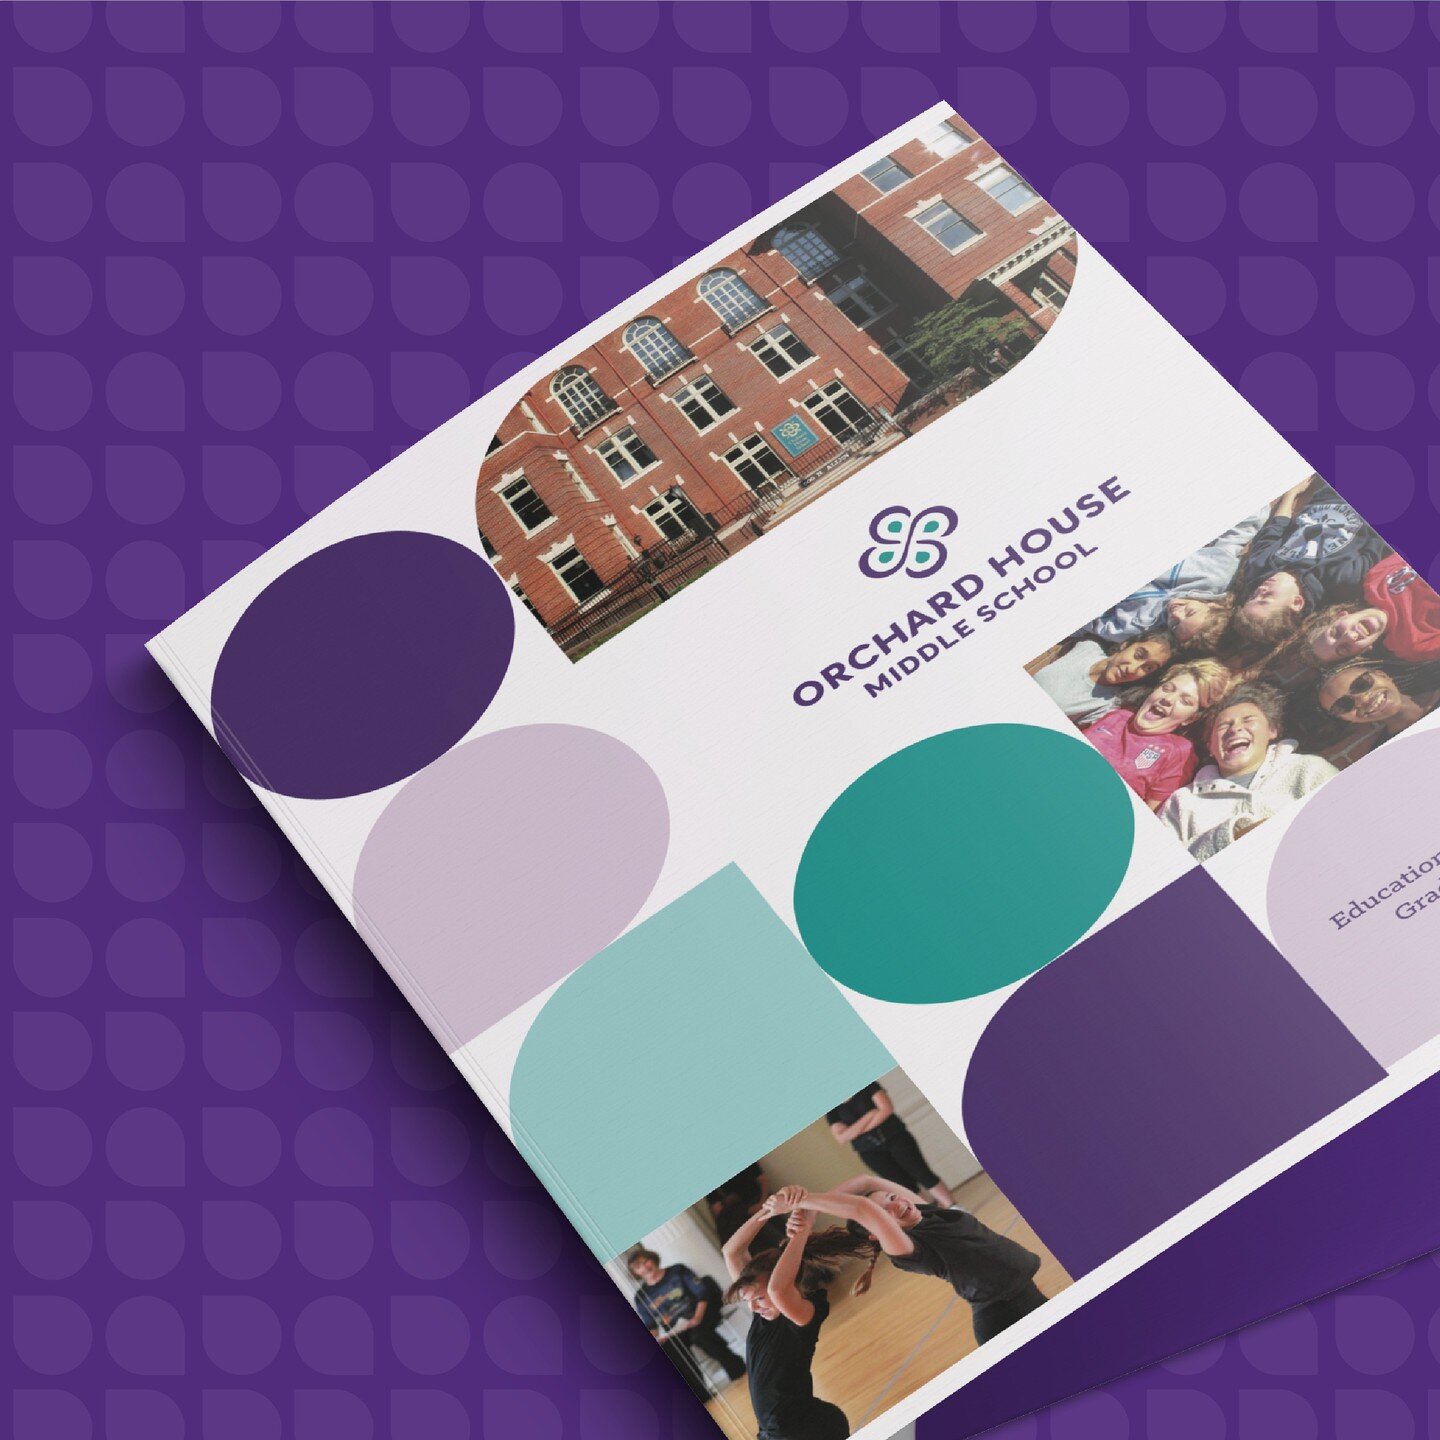 We're beyond thrilled to share the new brand for @orchardhousegirls, an independent school for girls here in Richmond! 📚

In partnership with @evergib, we were tasked with creating a brand that empowers young minds and fosters community among the ex